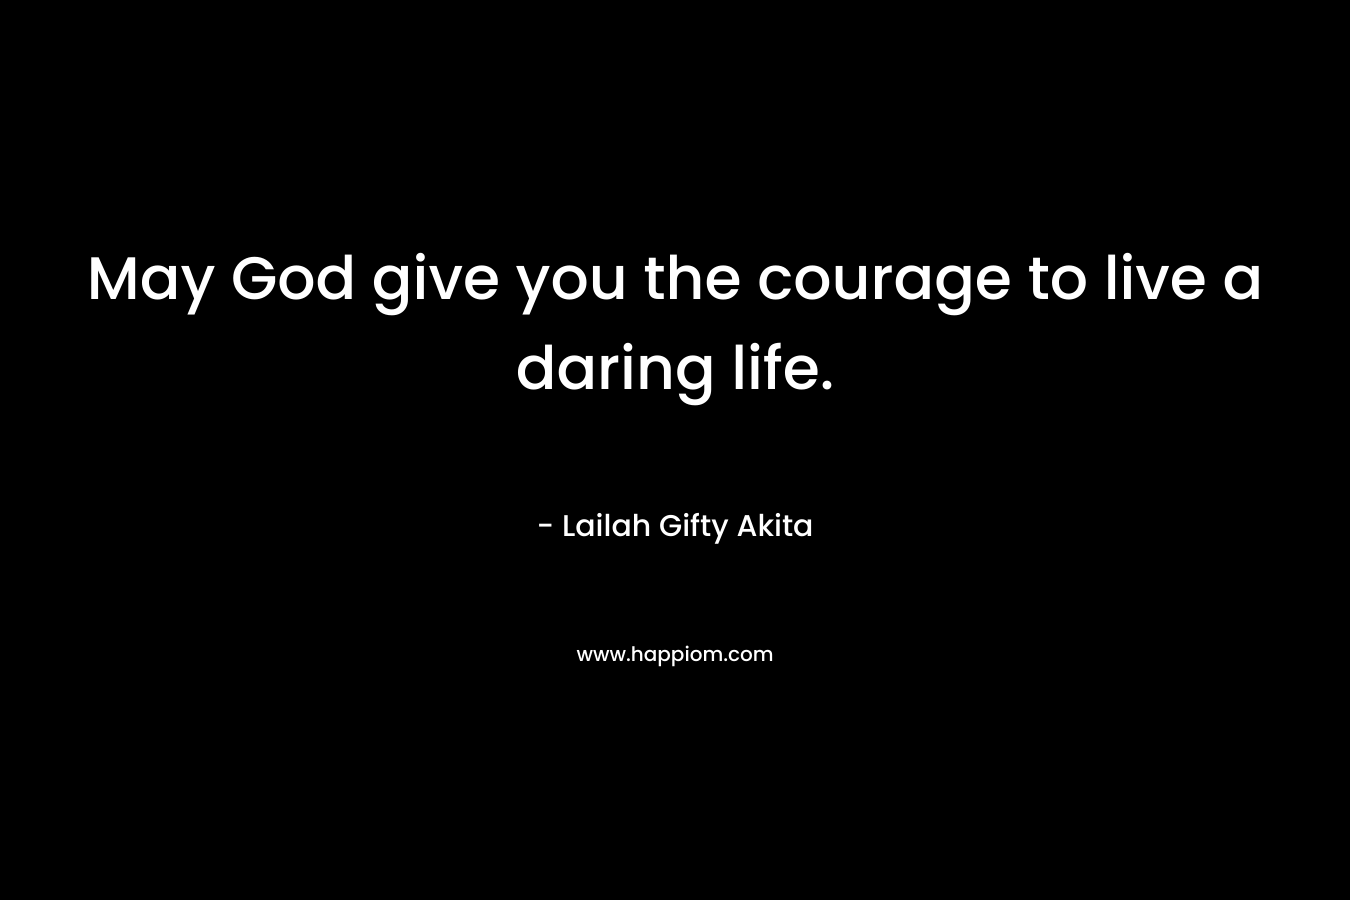 May God give you the courage to live a daring life.